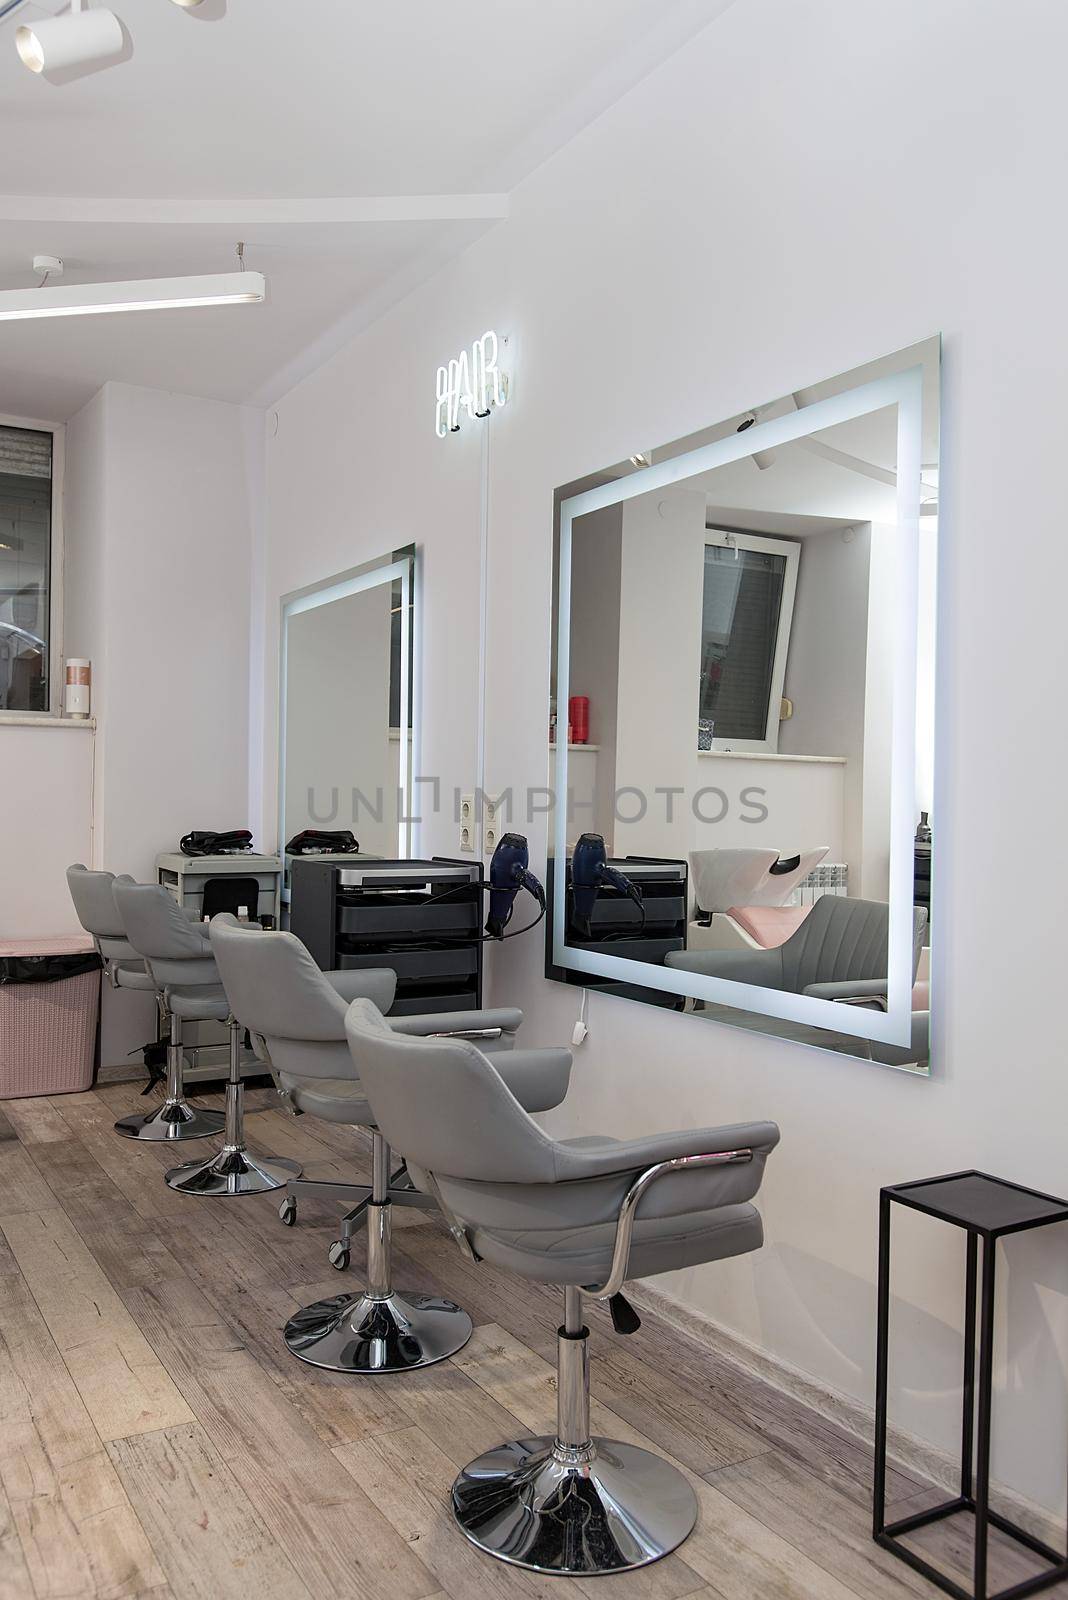 Workplace for haircut in barbershop, with backlit mirror by Ashtray25